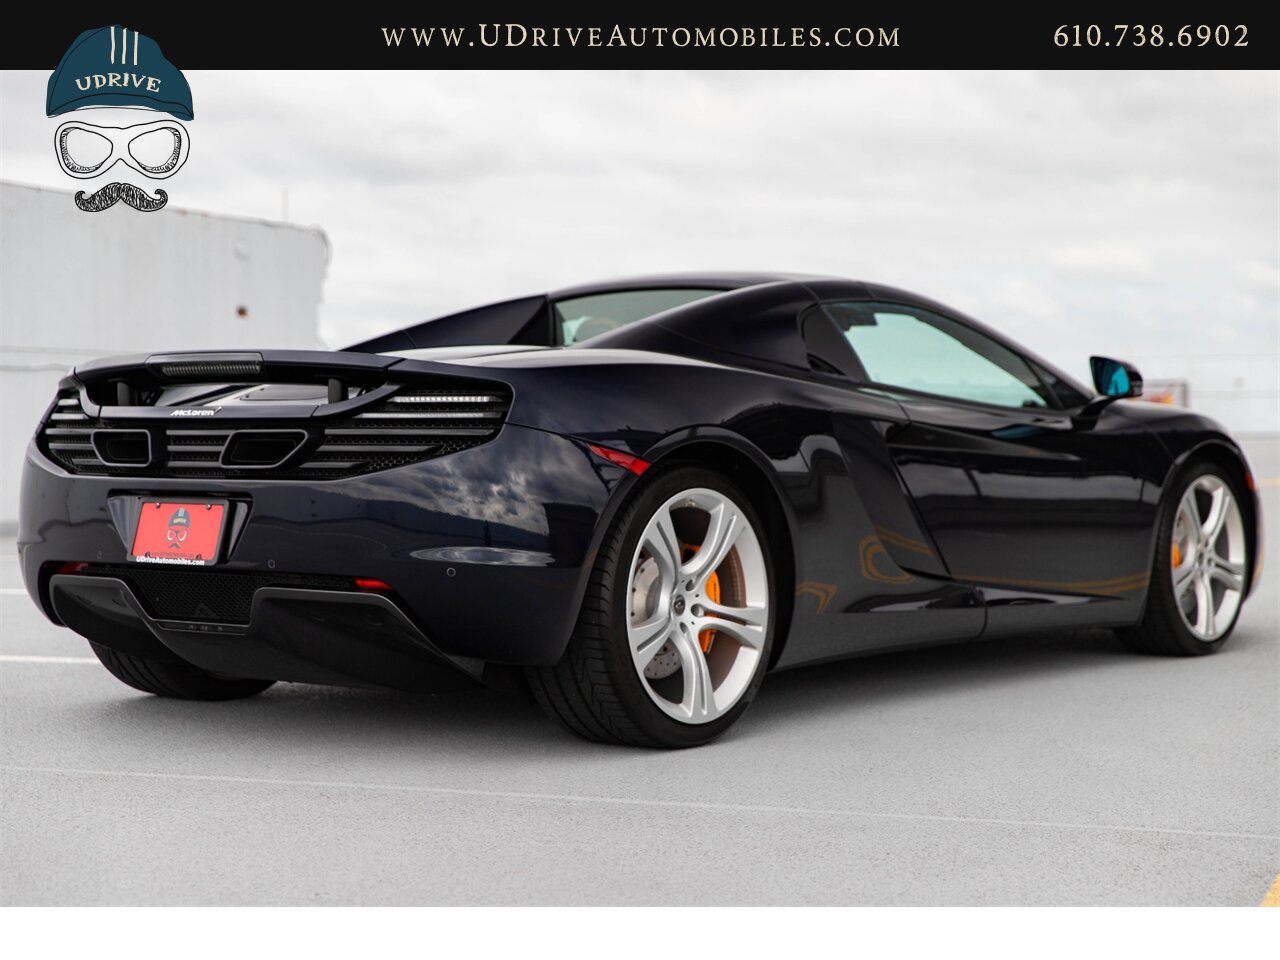 2013 McLaren MP4-12C Spider 1 Owner 6k Miles Carbon Fiber Full Leather  Sapphire Black over Natural Tan Leather - Photo 20 - West Chester, PA 19382